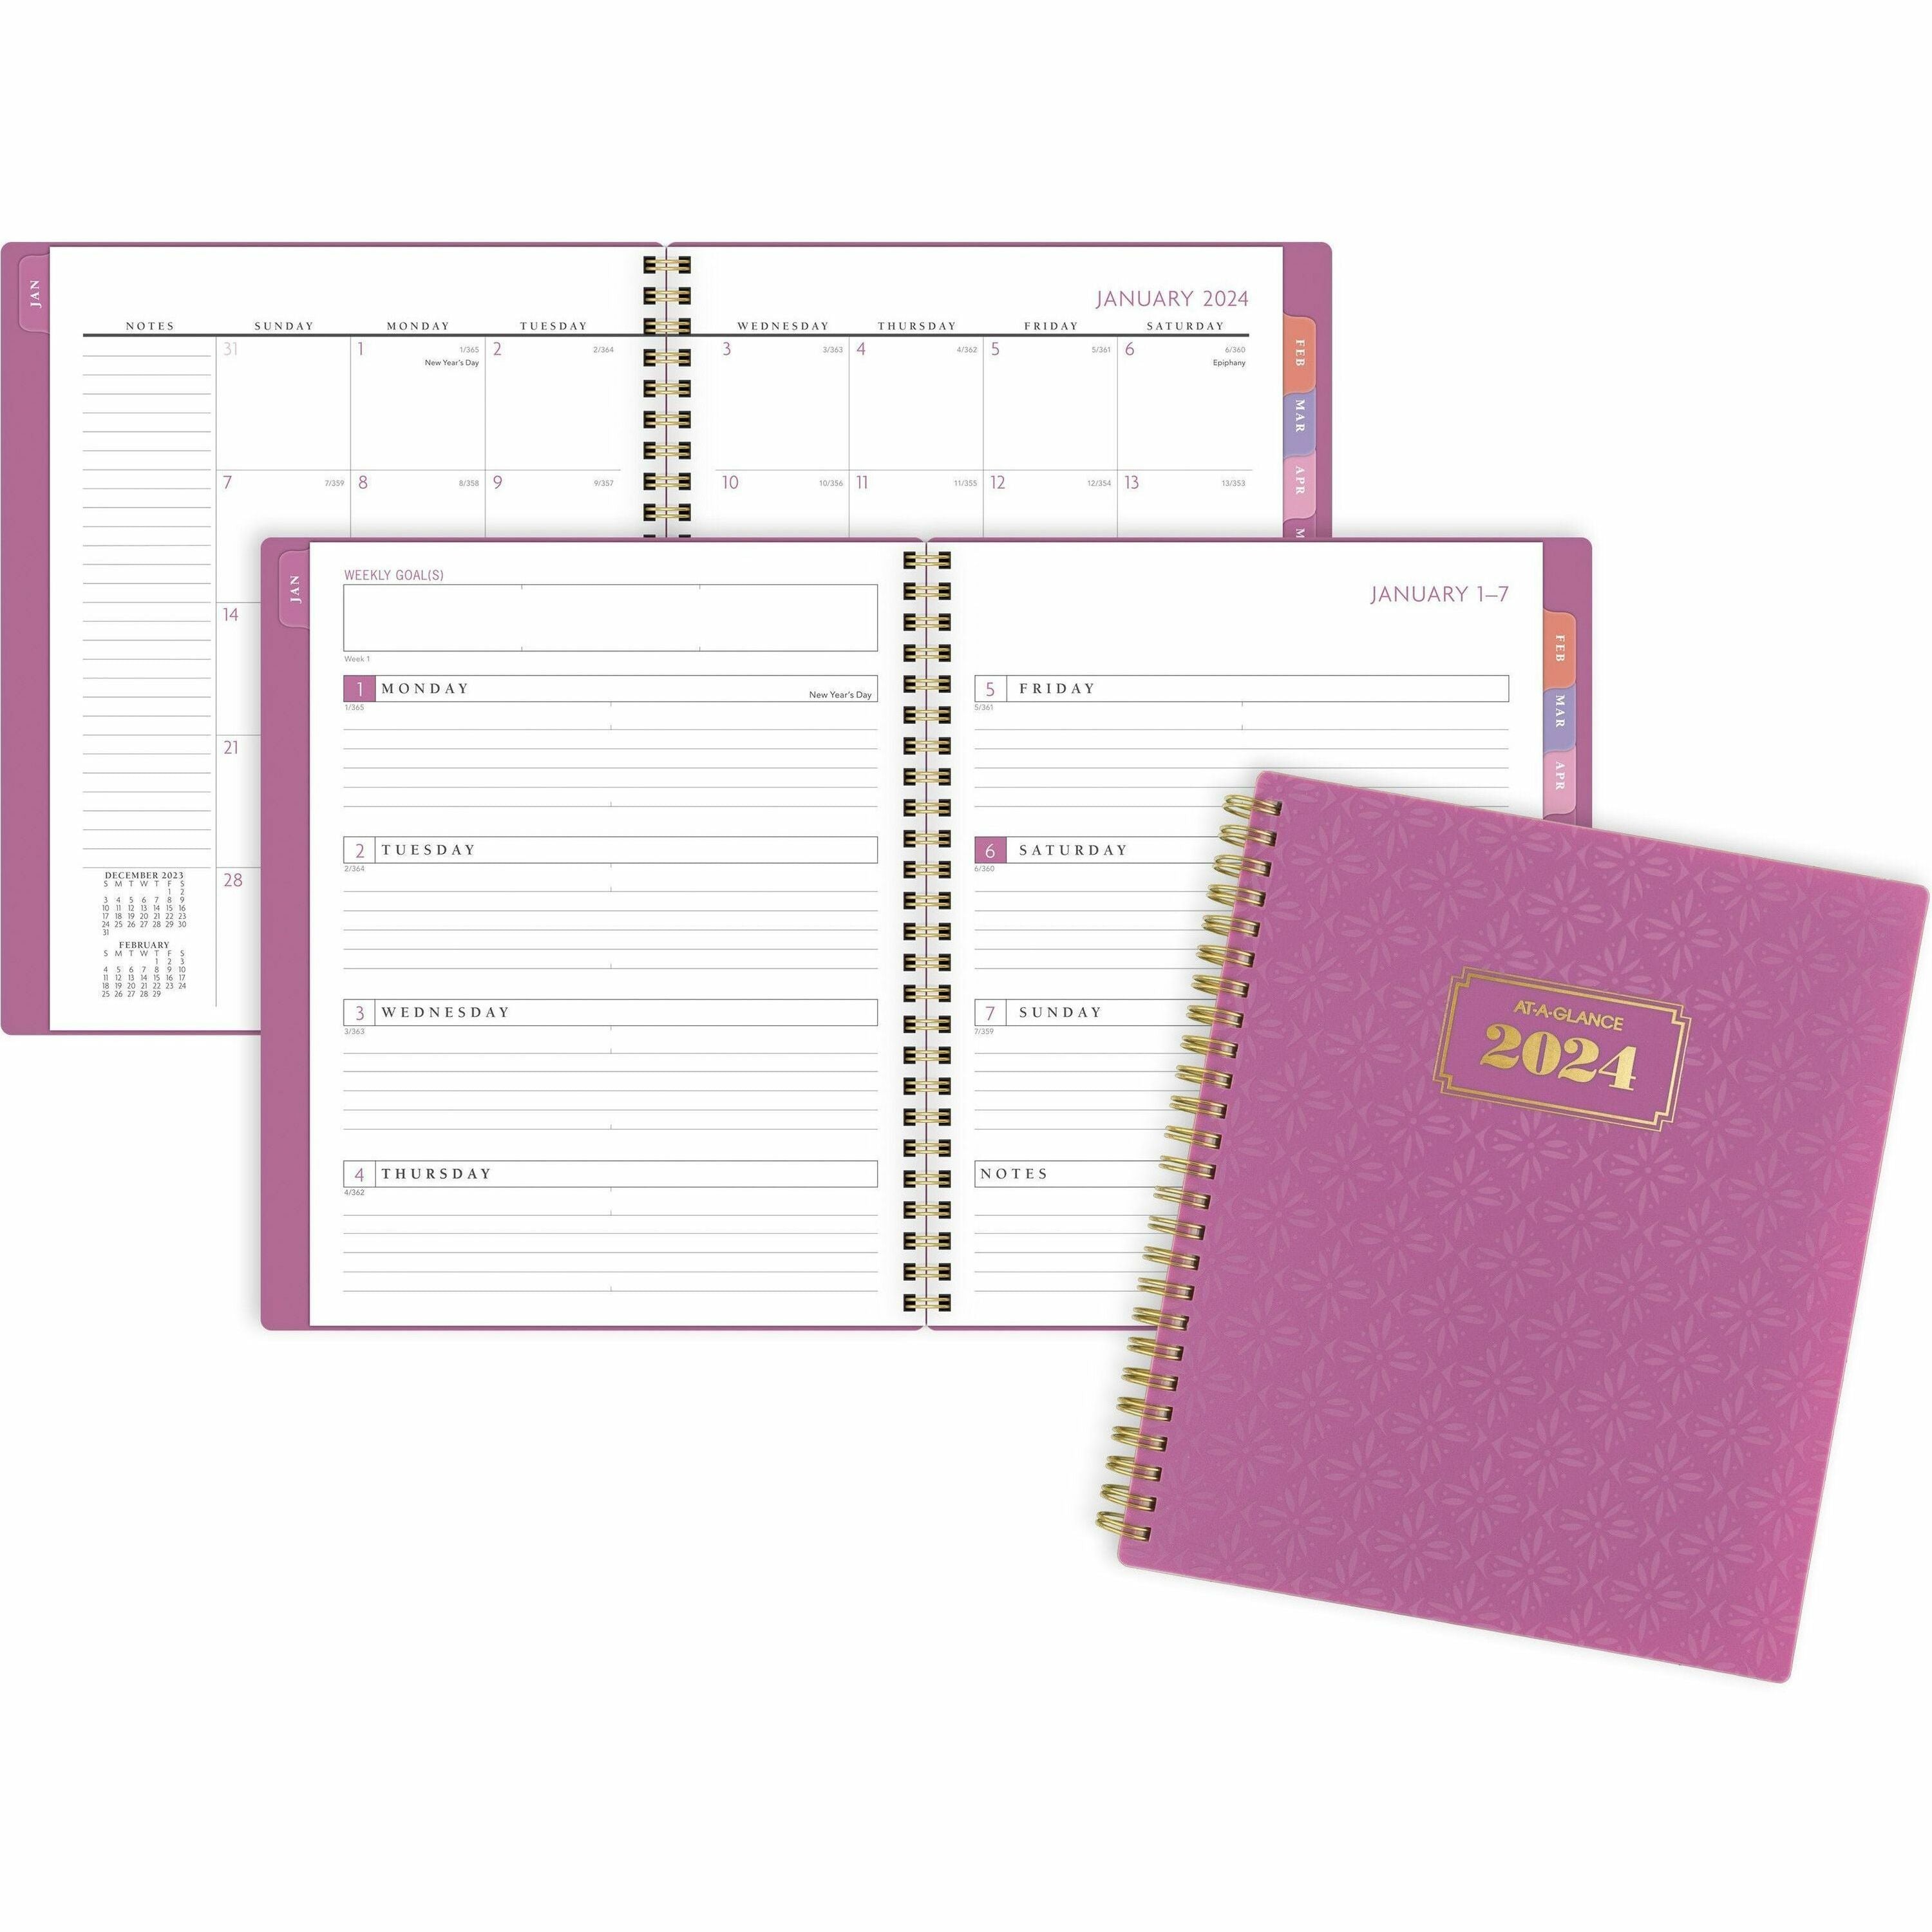 at-a-glance-badge-weekly-monthly-planner-small-size-weekly-monthly-13-month-january-2024-january-2025-7-x-8-3-4-sheet-size-twin-wire-purple-white-paper-bleed-resistant-dated-planning-page-reference-calendar-durable-flexibl_aag1675t805 - 1